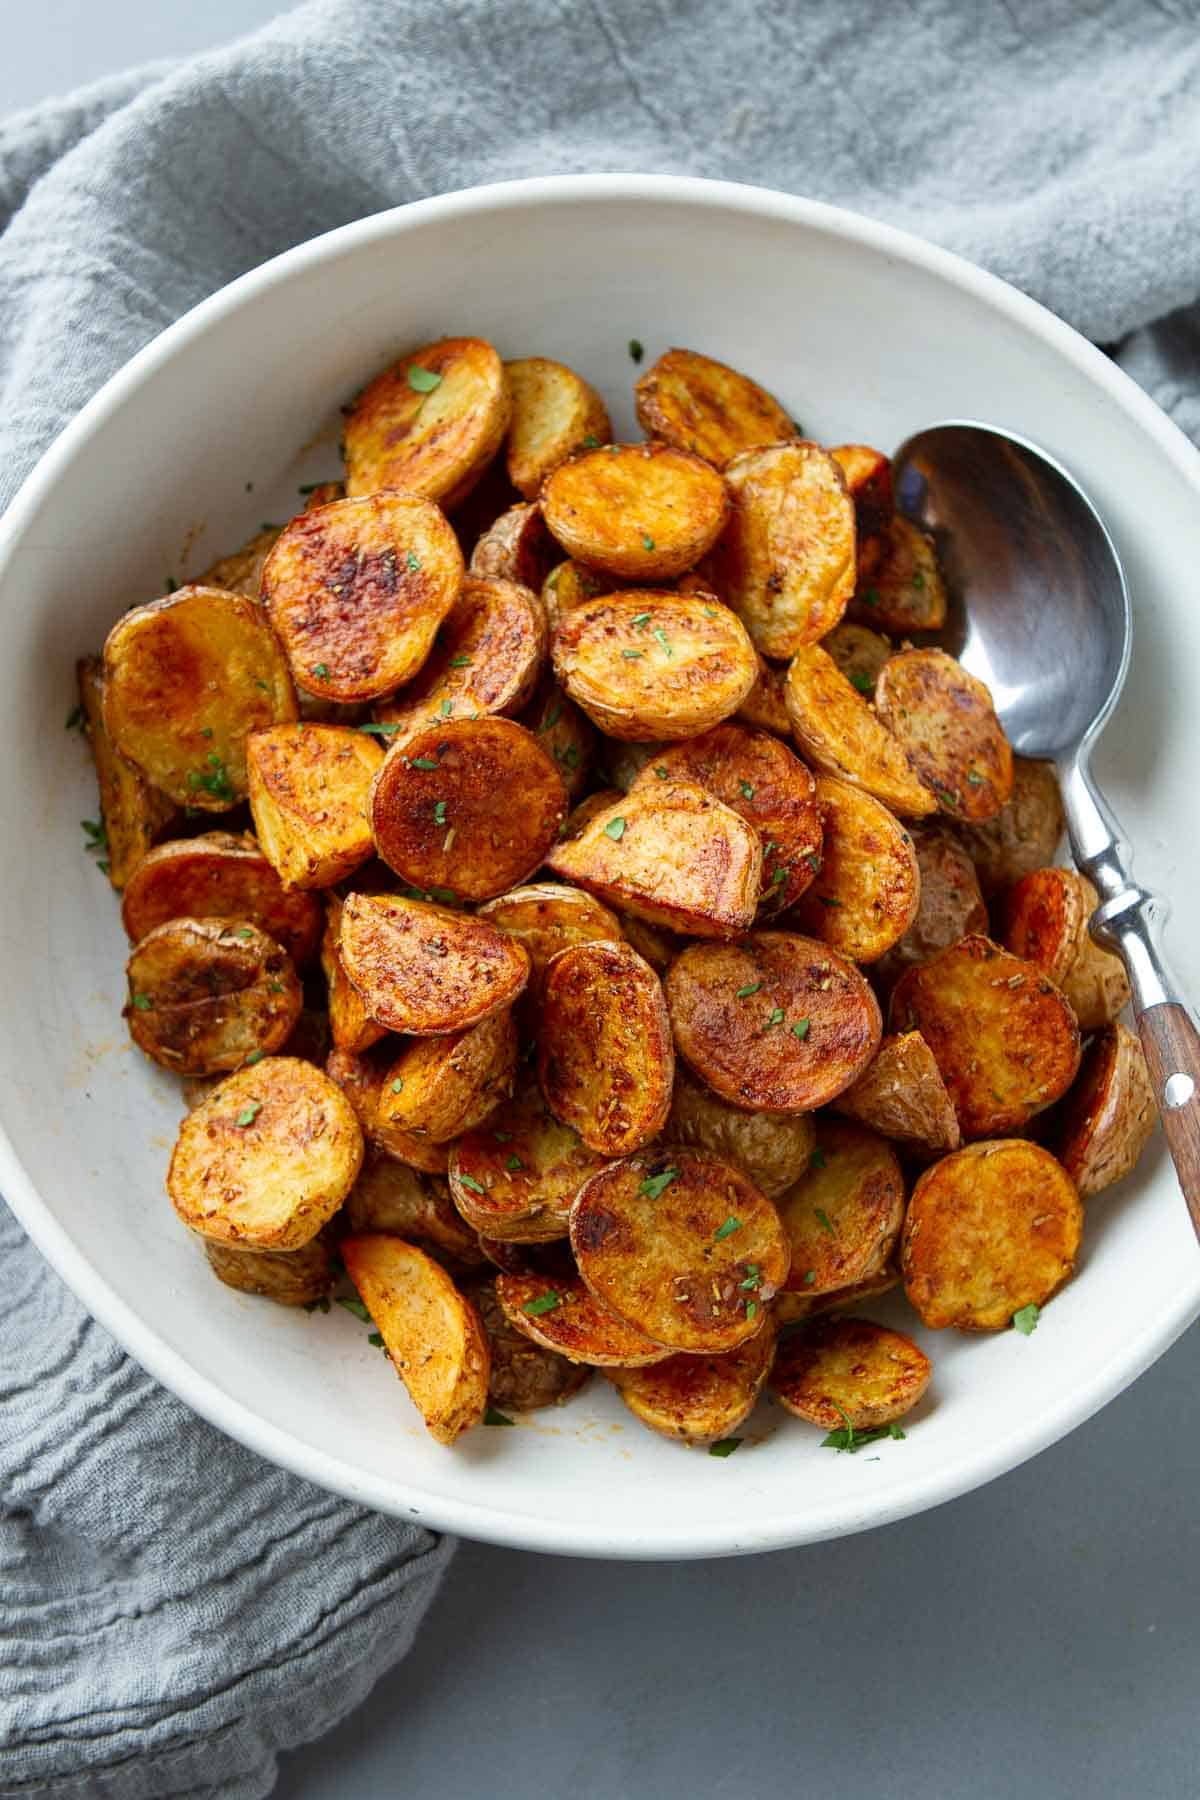 Crispy, smoky, and full of flavor, these roasted paprika potatoes are anything but boring. Perfect as a side dish or snack, they're sure to become your new obsession. Get 'em while they're hot! | Oven | With Paprika | WFPB | Plant Based | Vegan 